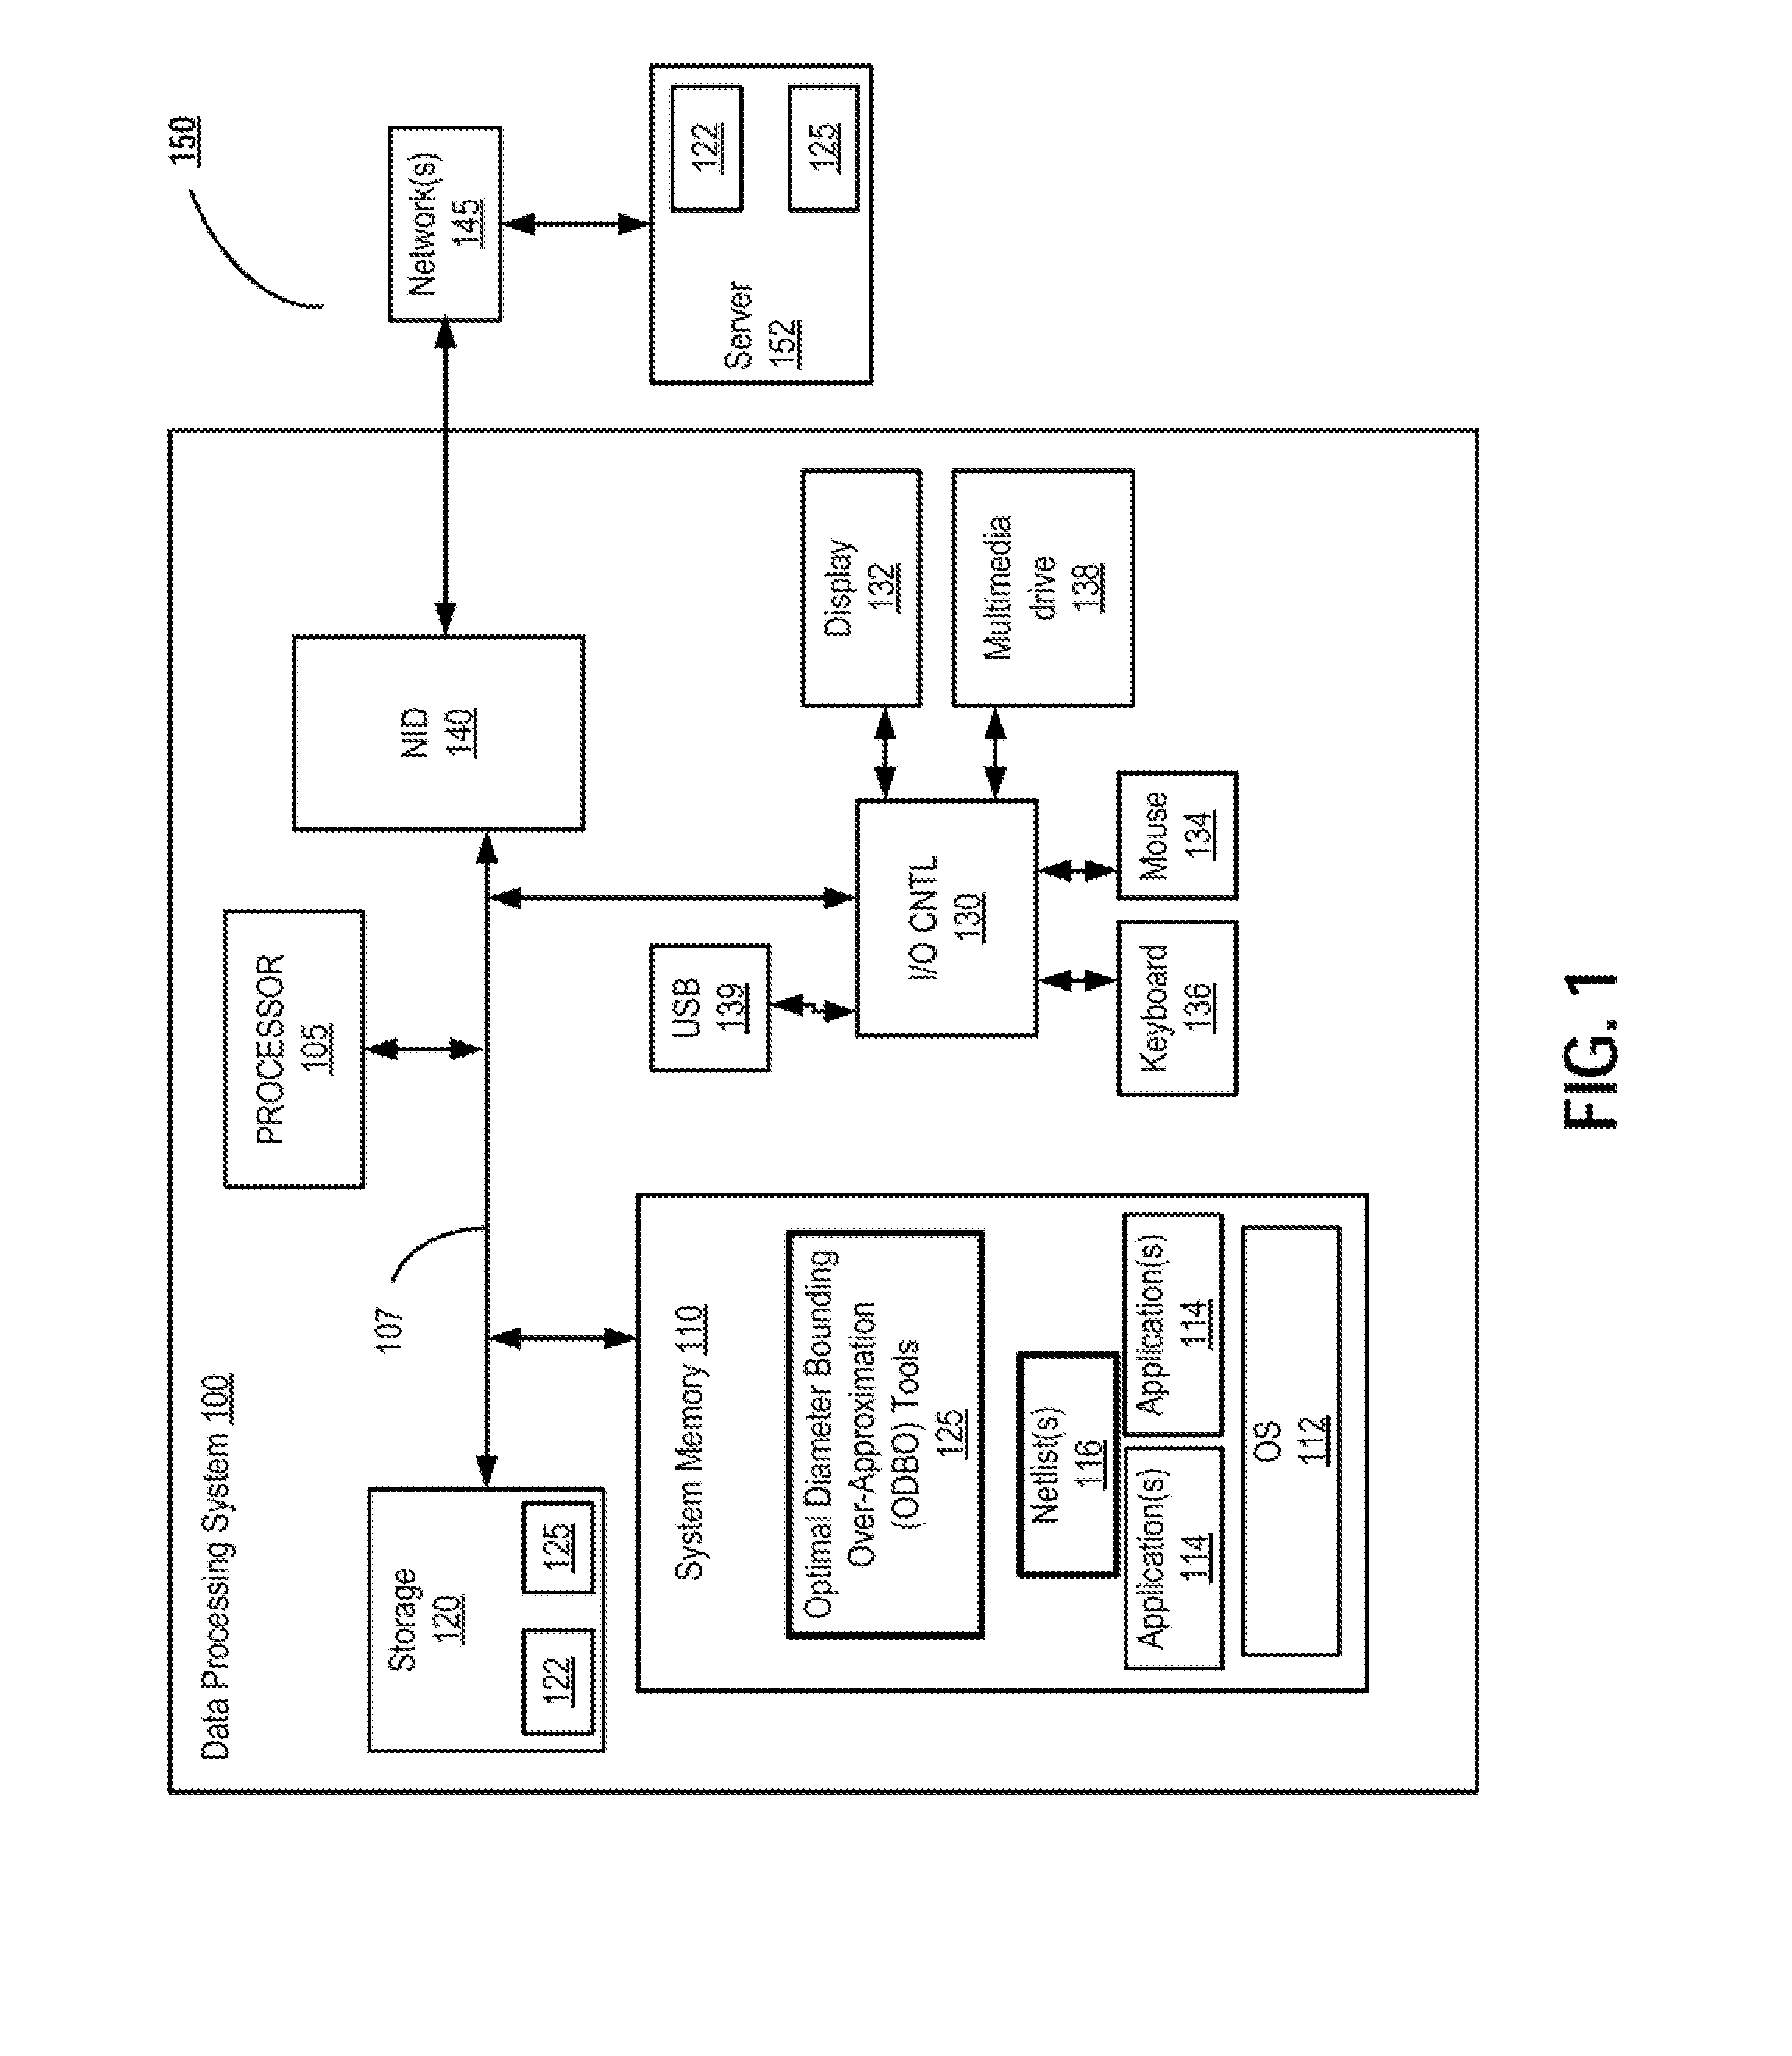 Method and system for optimal diameter bounding of designs with complex feed-forward components